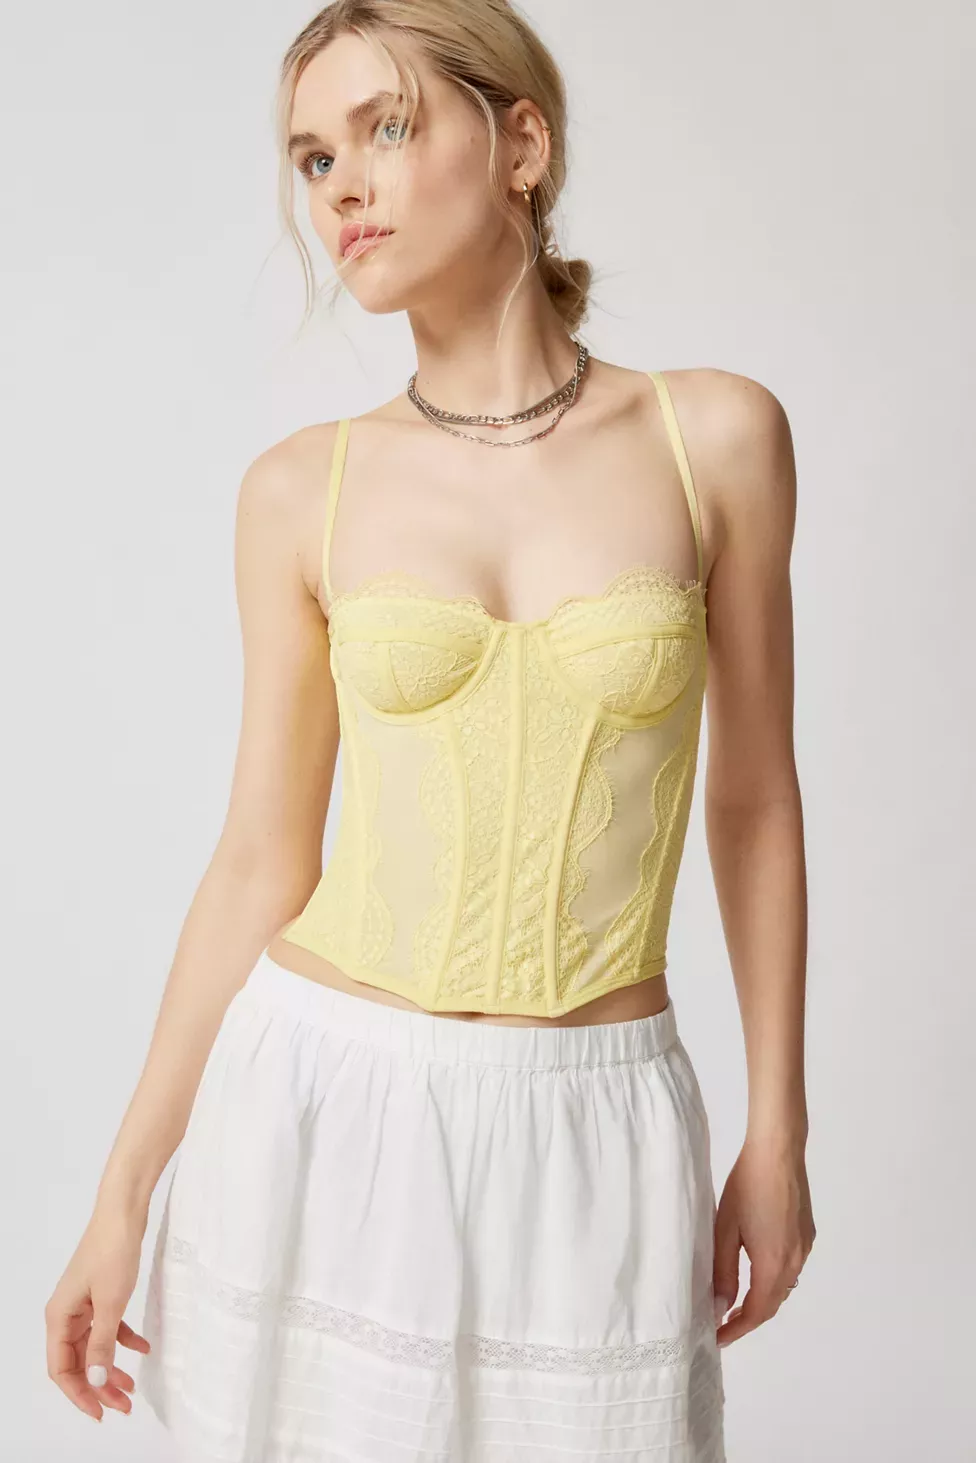 Urban Outfitters, Tops, Urban Outfitters Out From Under Modern Love Corset  Size Medium